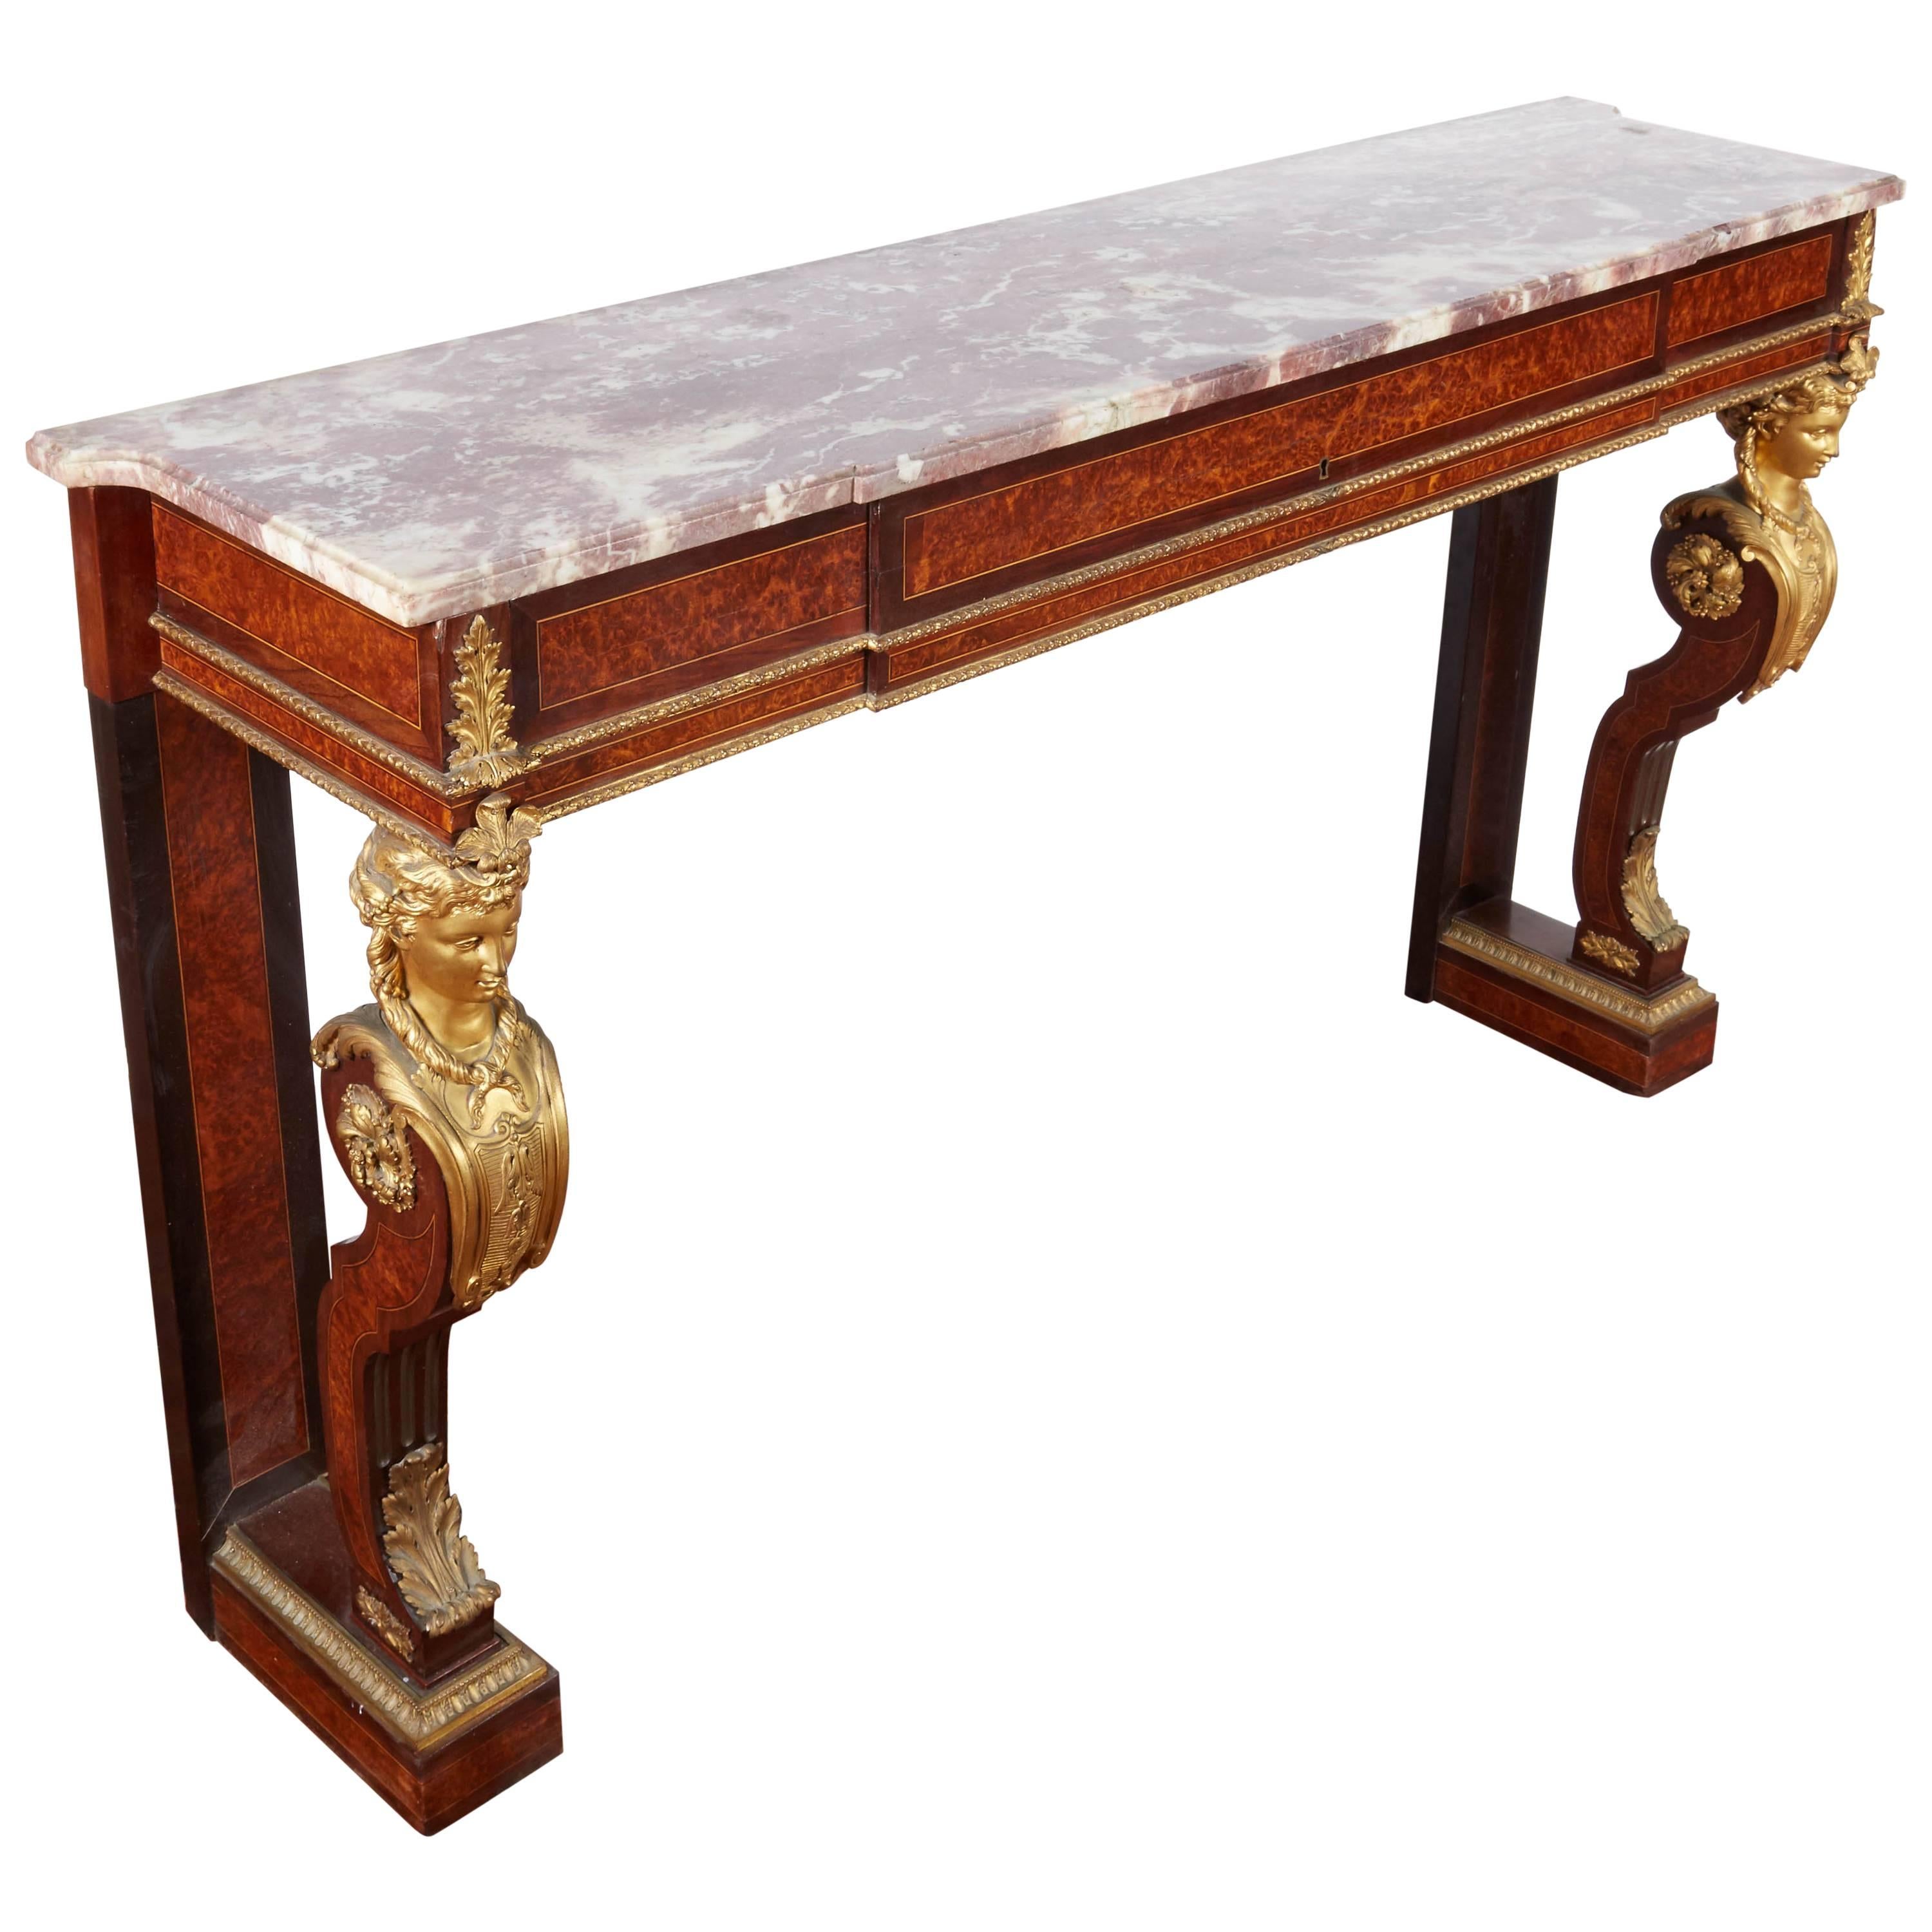 An exquisite French ormolu-mounted console table with marble top, 

19th century.

Very high quality mounts, with original marble top.

Measures: 32